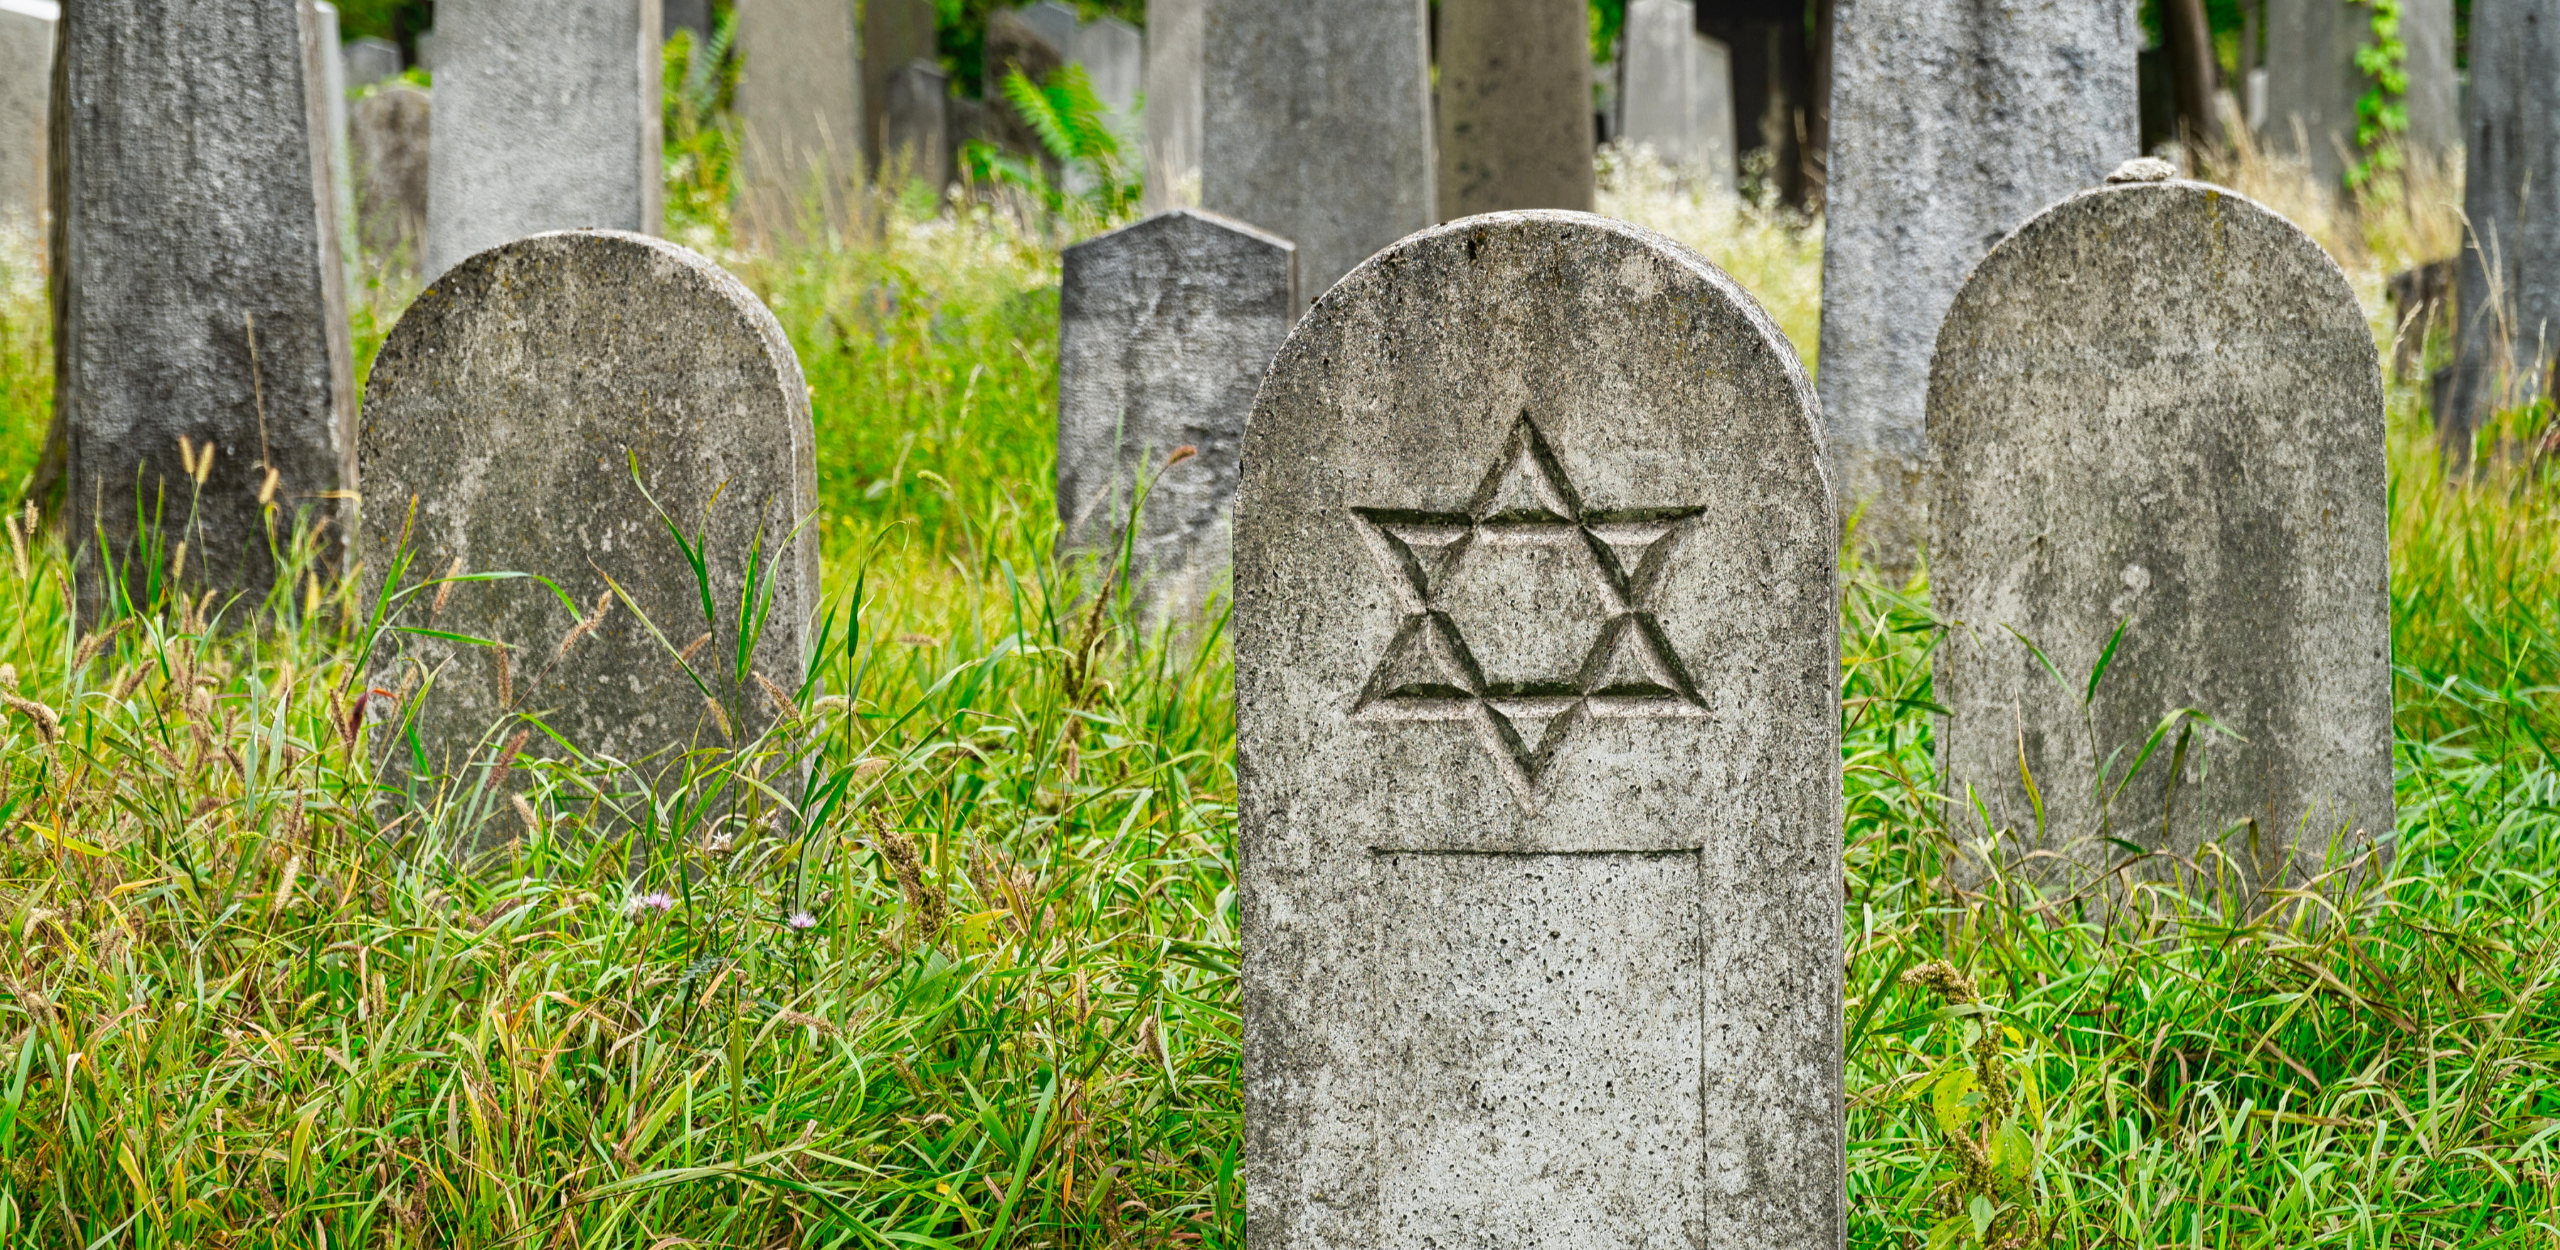 Cemetery with headstones with a Jewish symbol